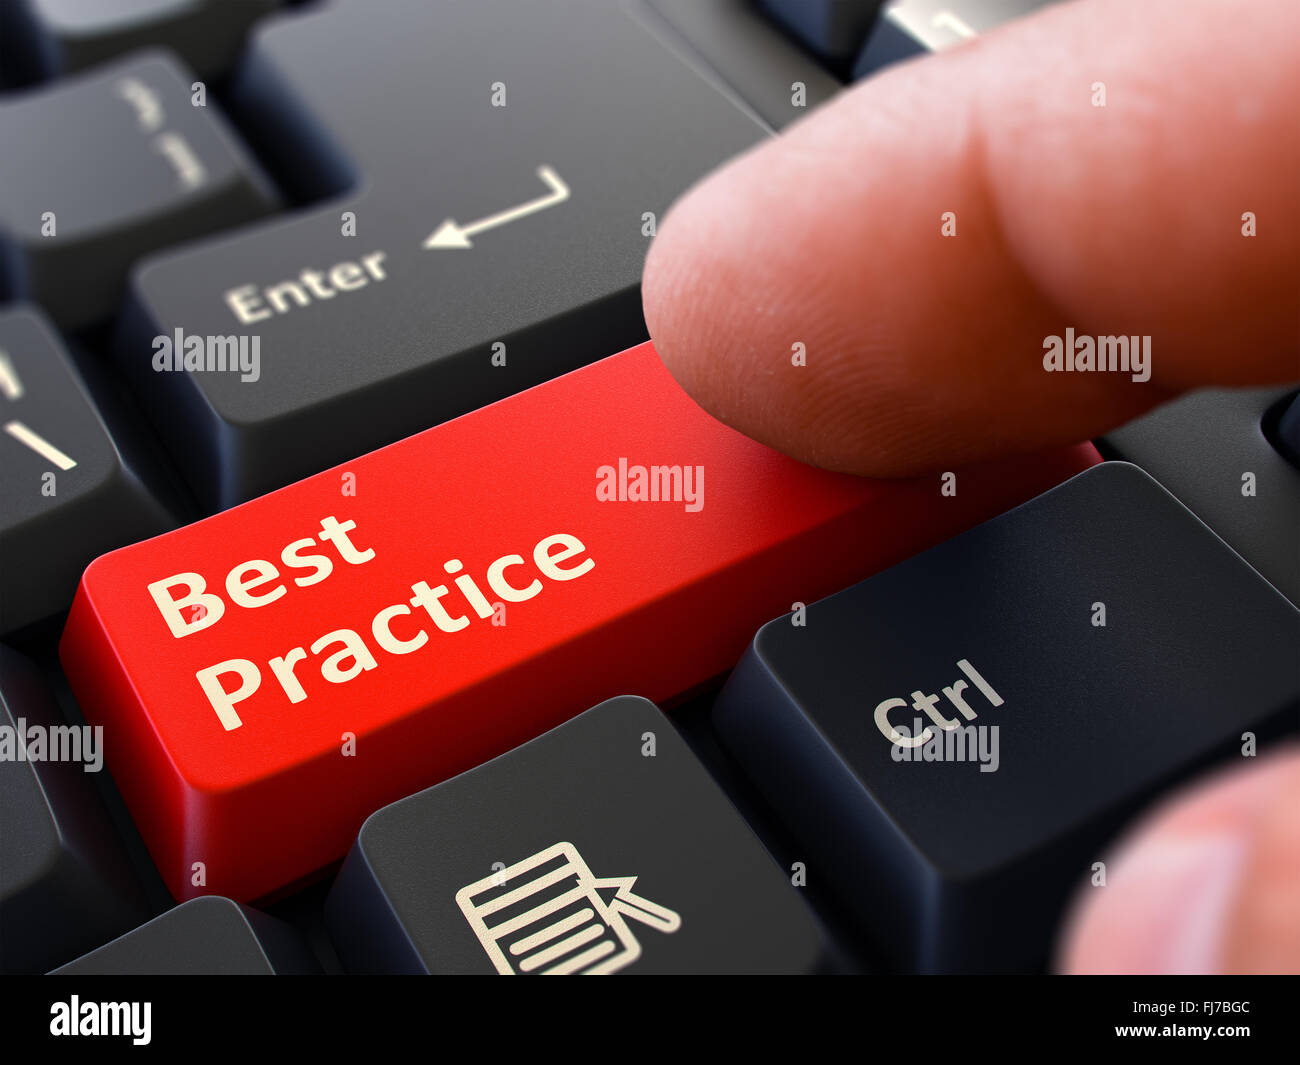 Best Practice - Concept on Red Keyboard Button. Stock Photo